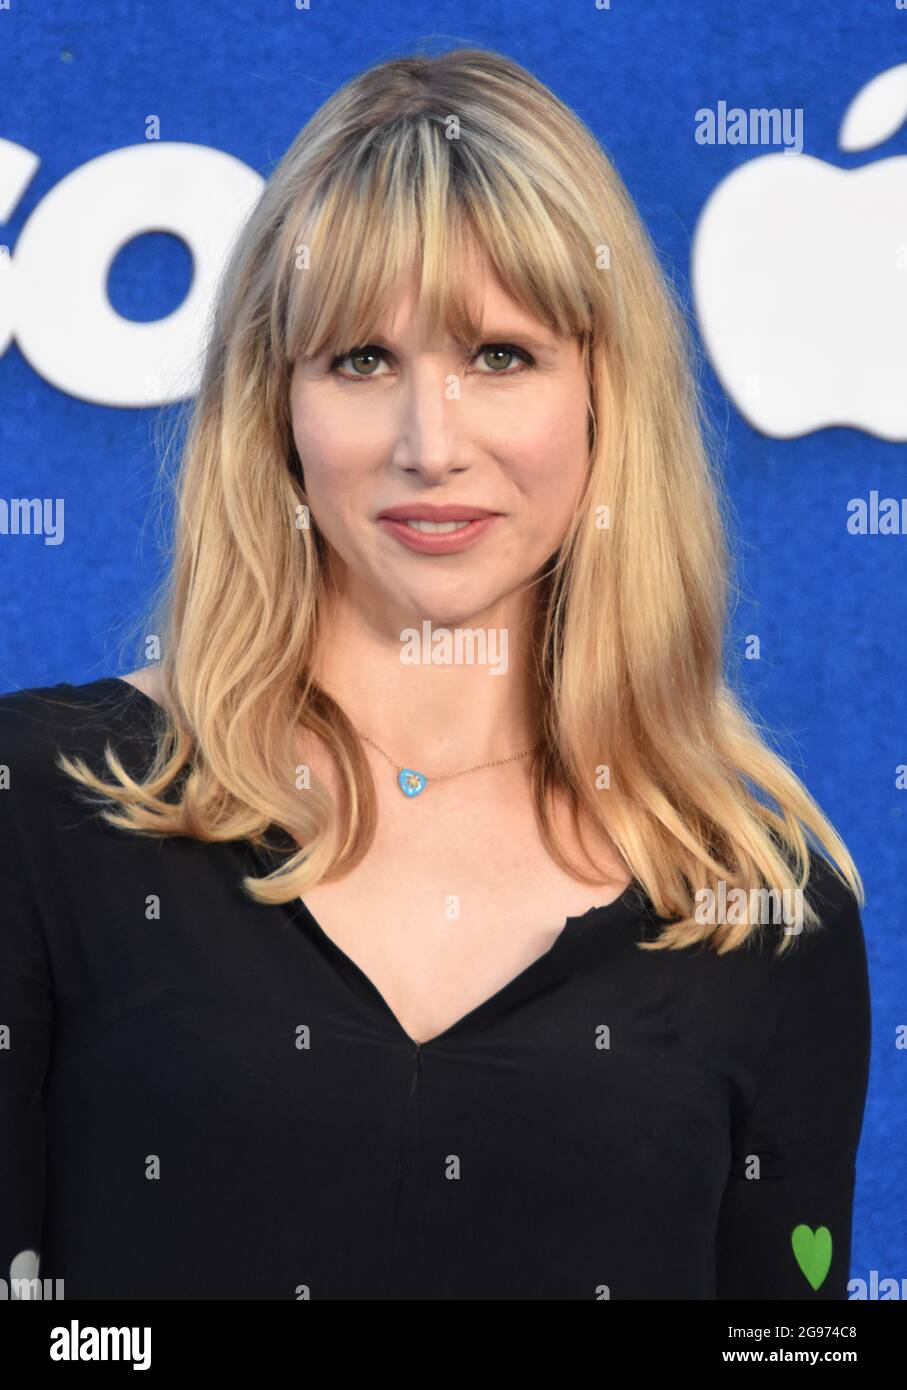 West Hollywood, California, USA 15th July 2021 Actress Lucy Punch attends Apple's 'Ted Lasso' Season Two Premiere Event at The Rooftop at The Pacific Design Center on July 15, 2021 in West Hollywood, California, USA. Photo by Barry King/Alamy Stock Photo Stock Photo